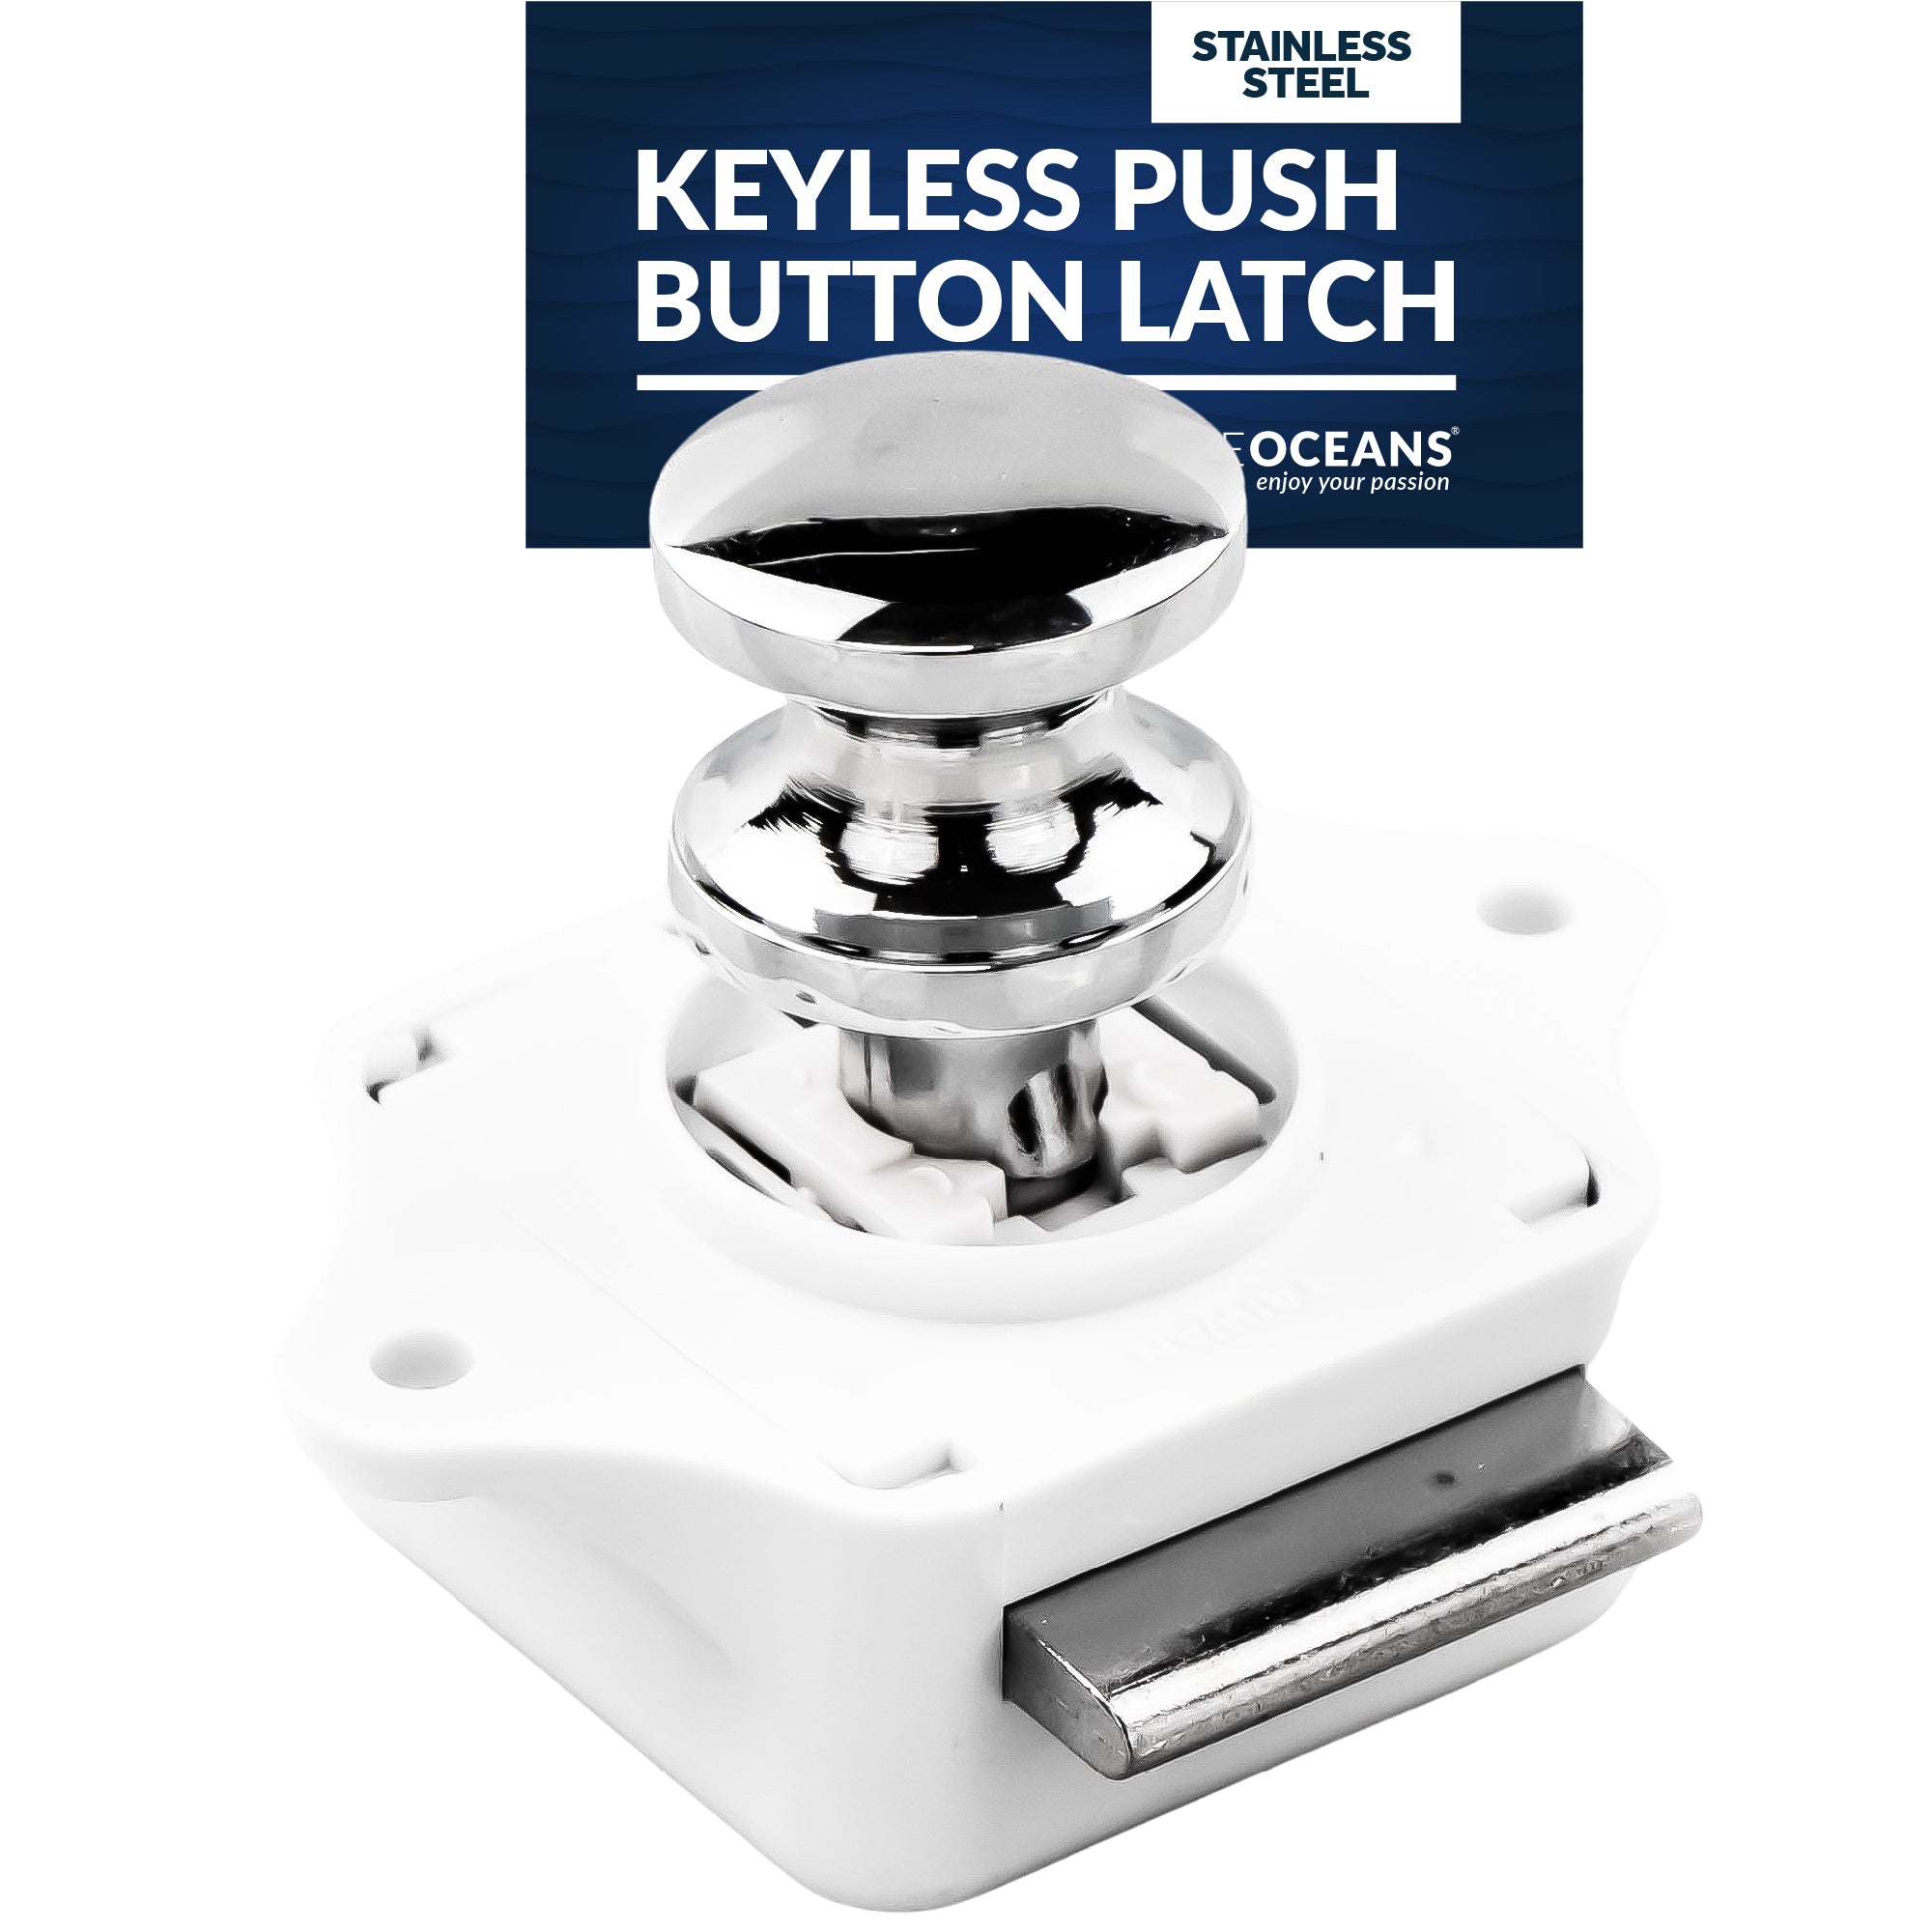 Keyless Push Button Latch, Stainless Steel - FO92